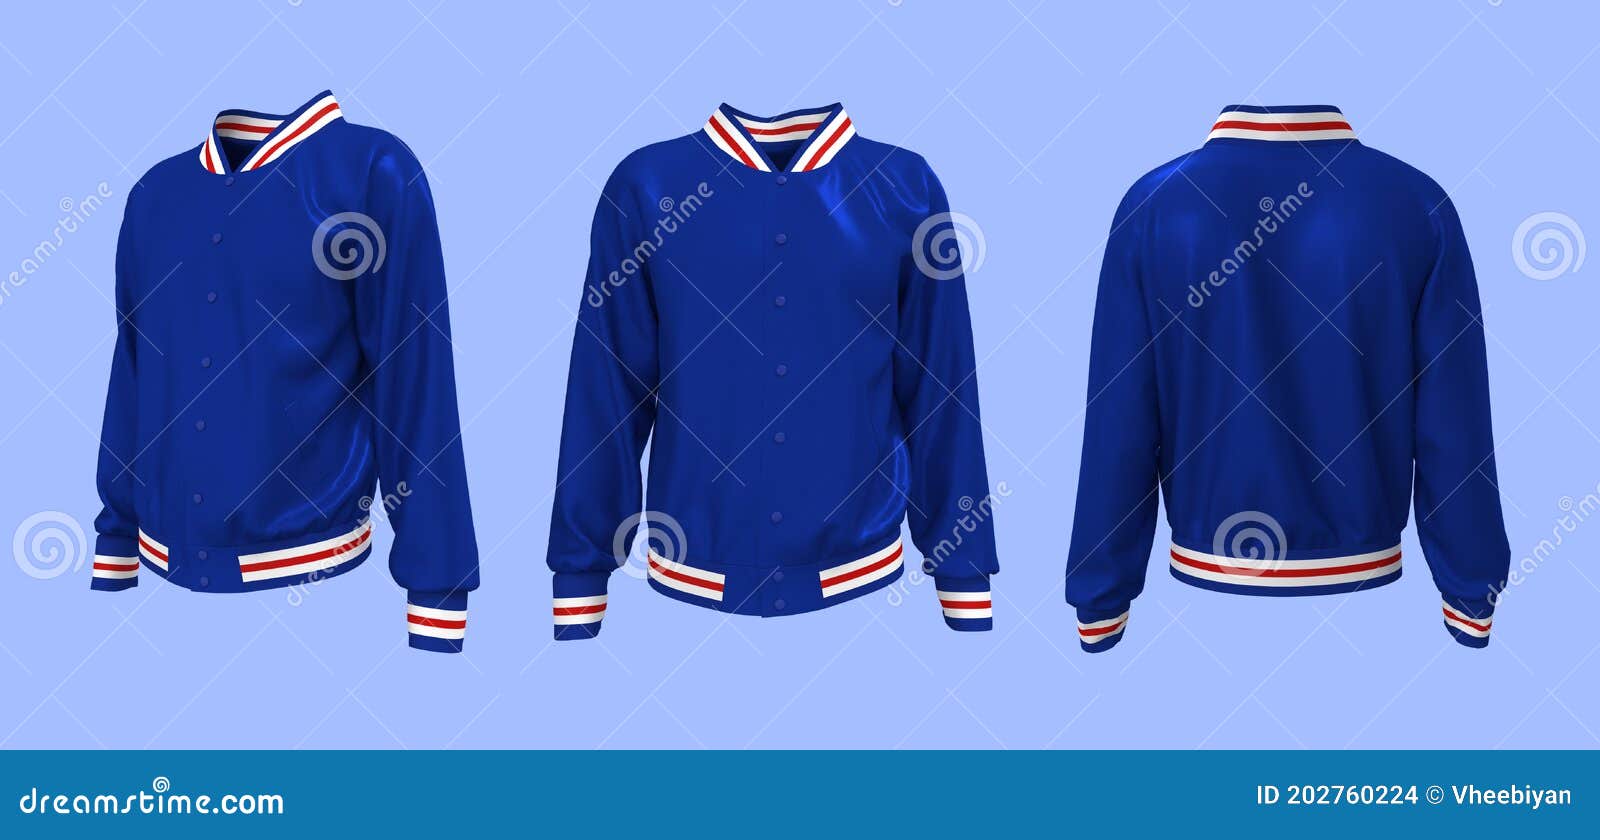 Download Varsity Jacket Mockup In Front, Side And Back Views. Stock ...